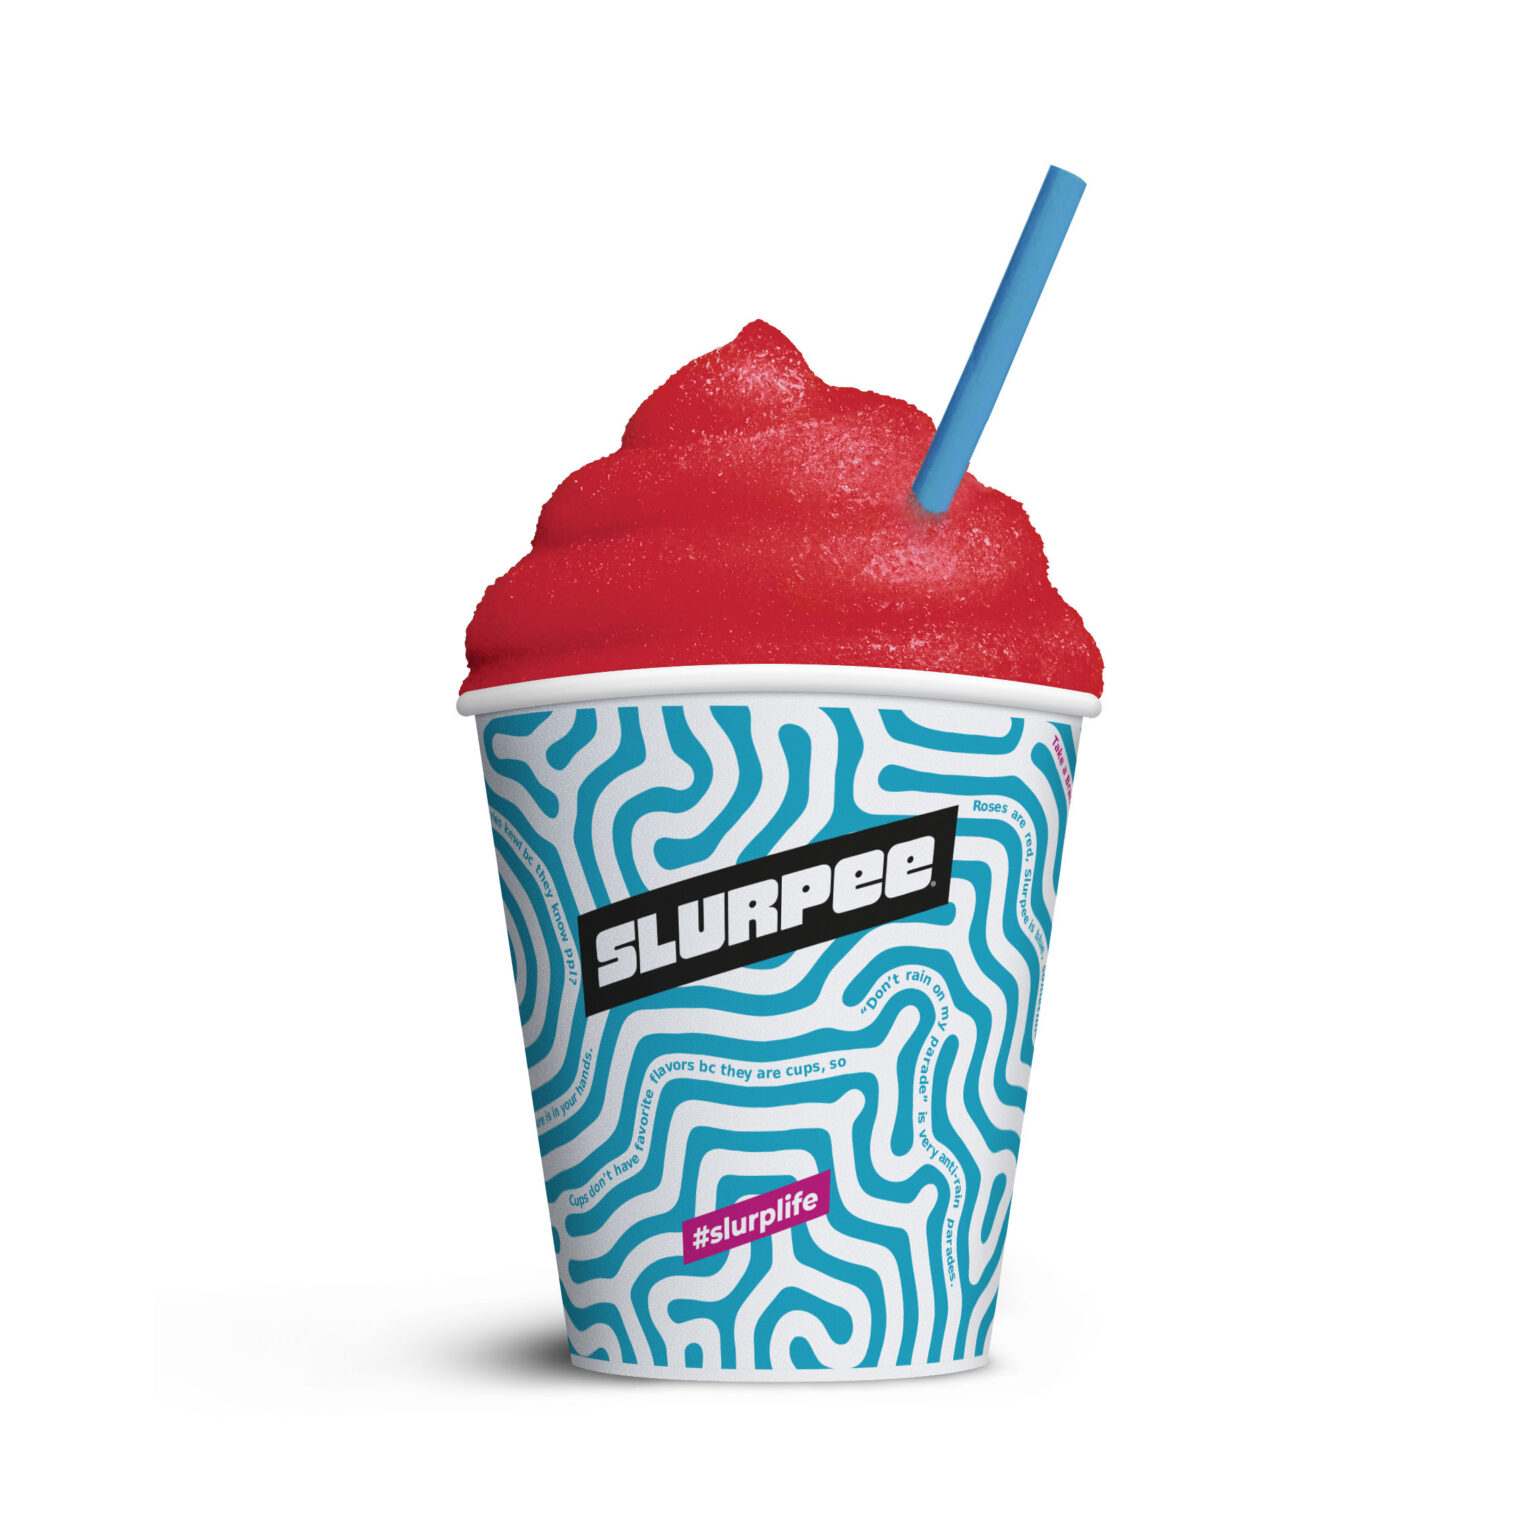 Today is Free Slurpee Day at 7Eleven